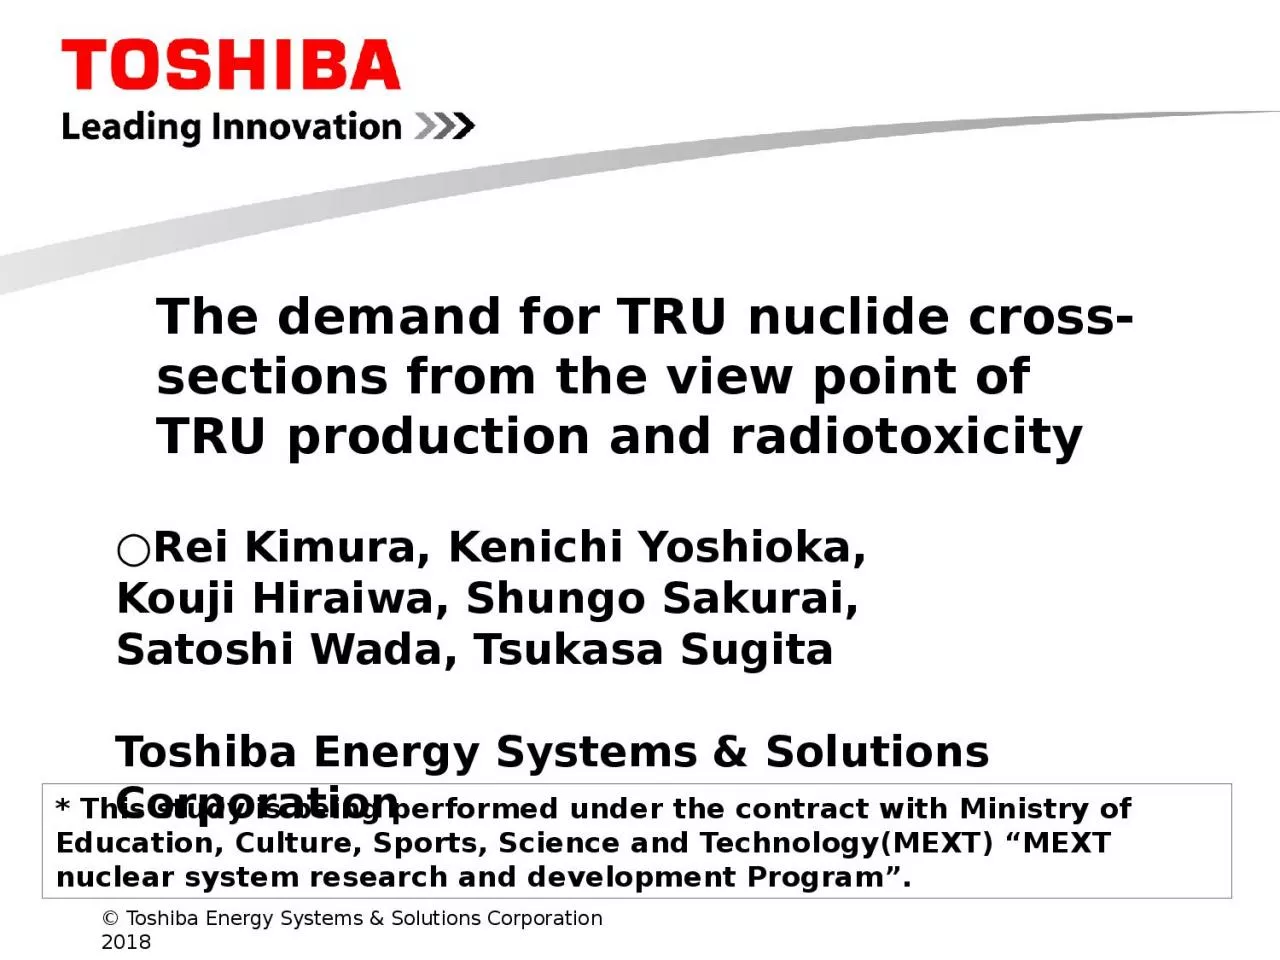 The demand for TRU nuclide cross-sections from the view point of